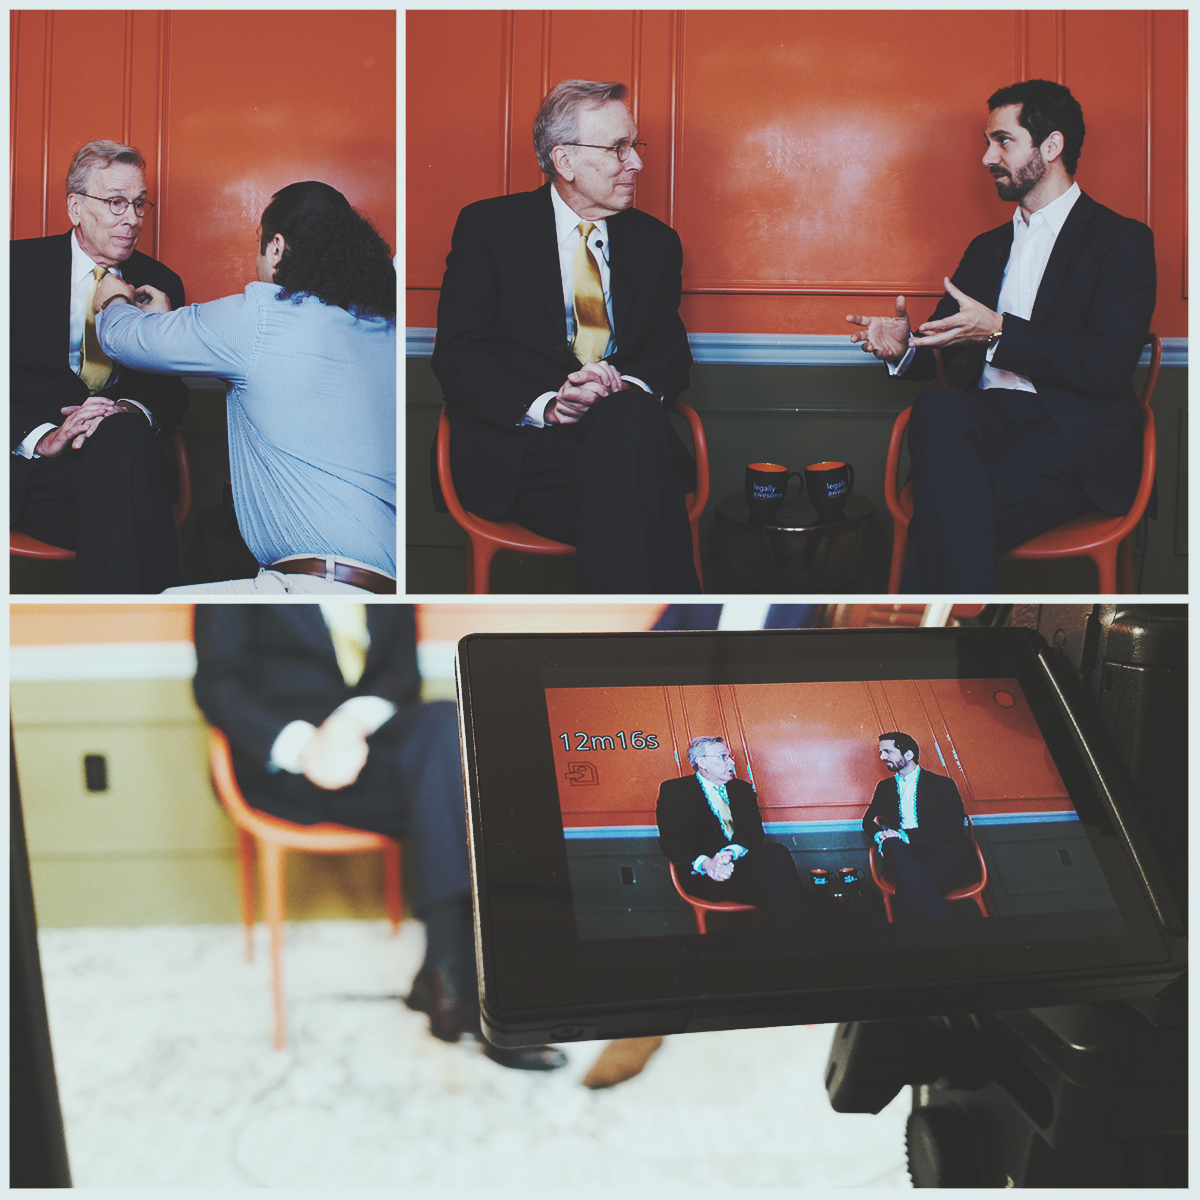 Masar filming an interview with Columbia Law School Professor William Simon